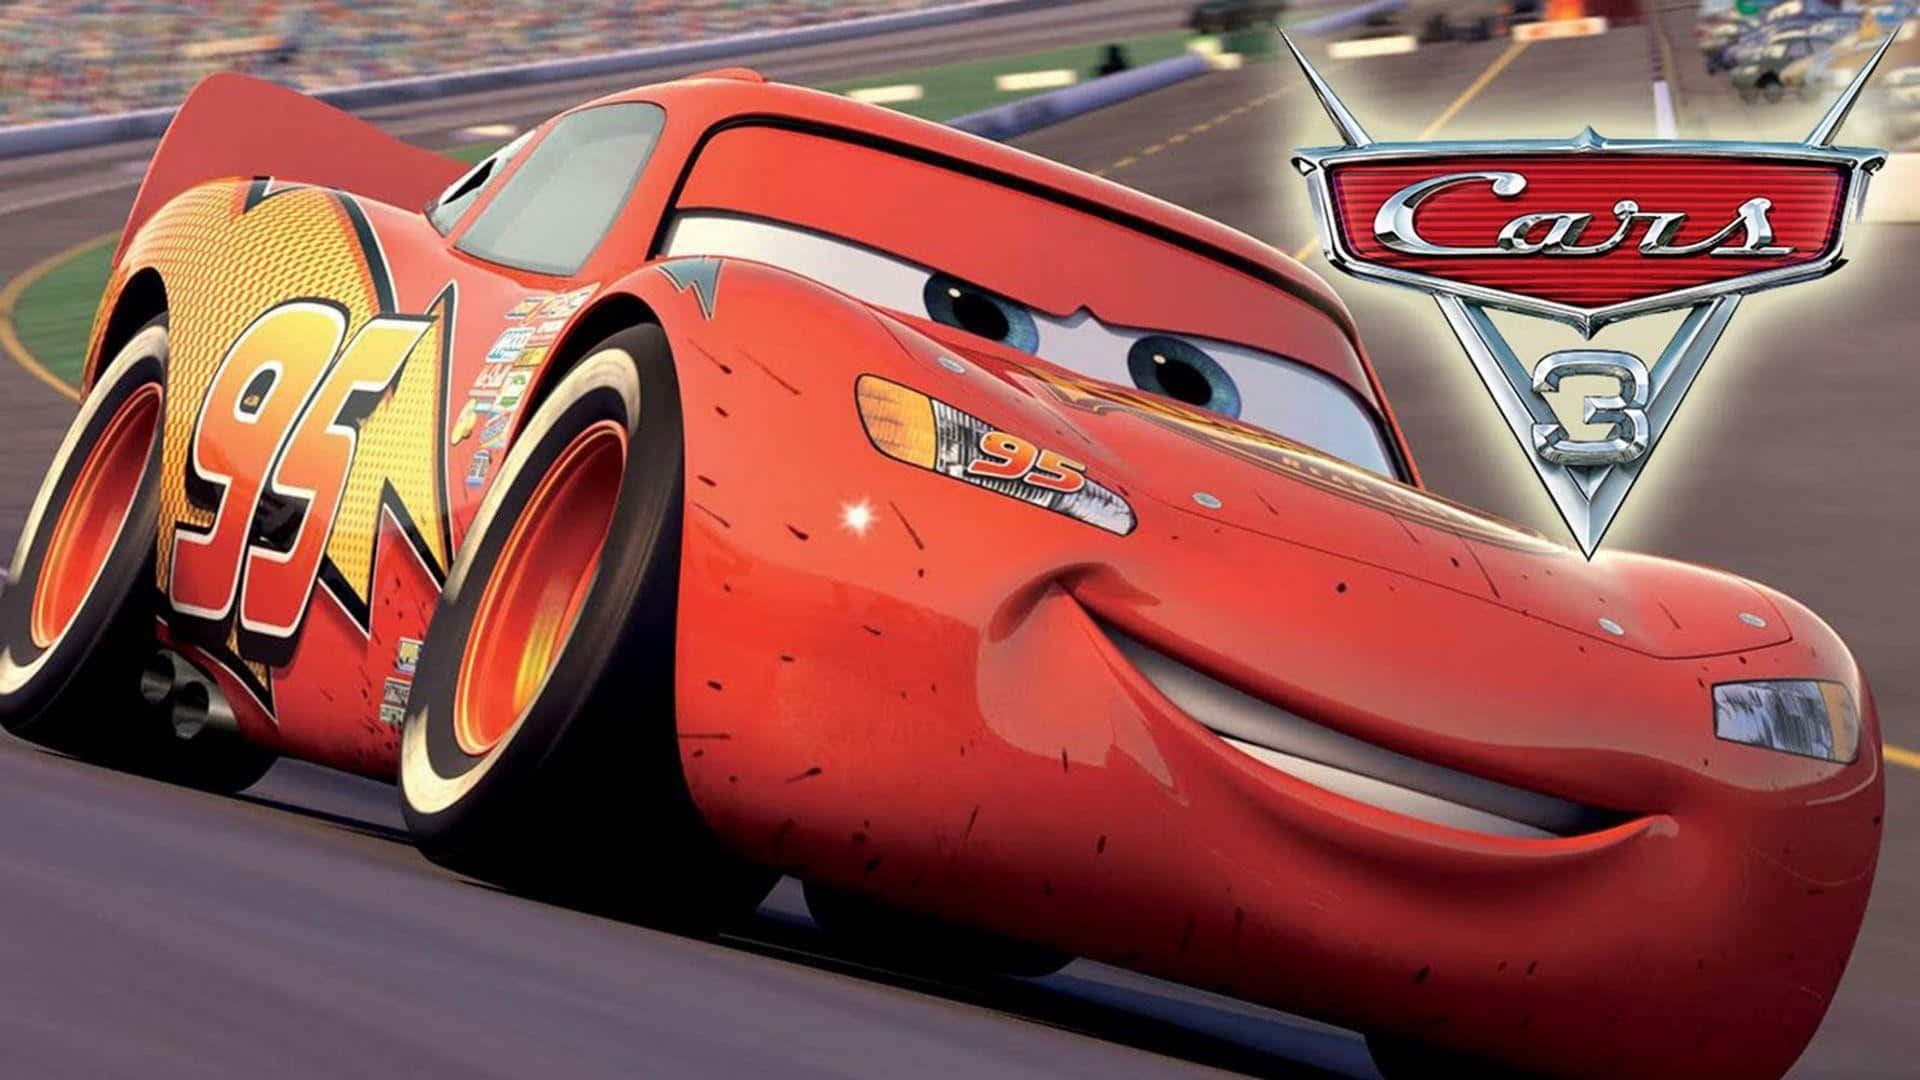 Lightning McQueen Racing on the Track